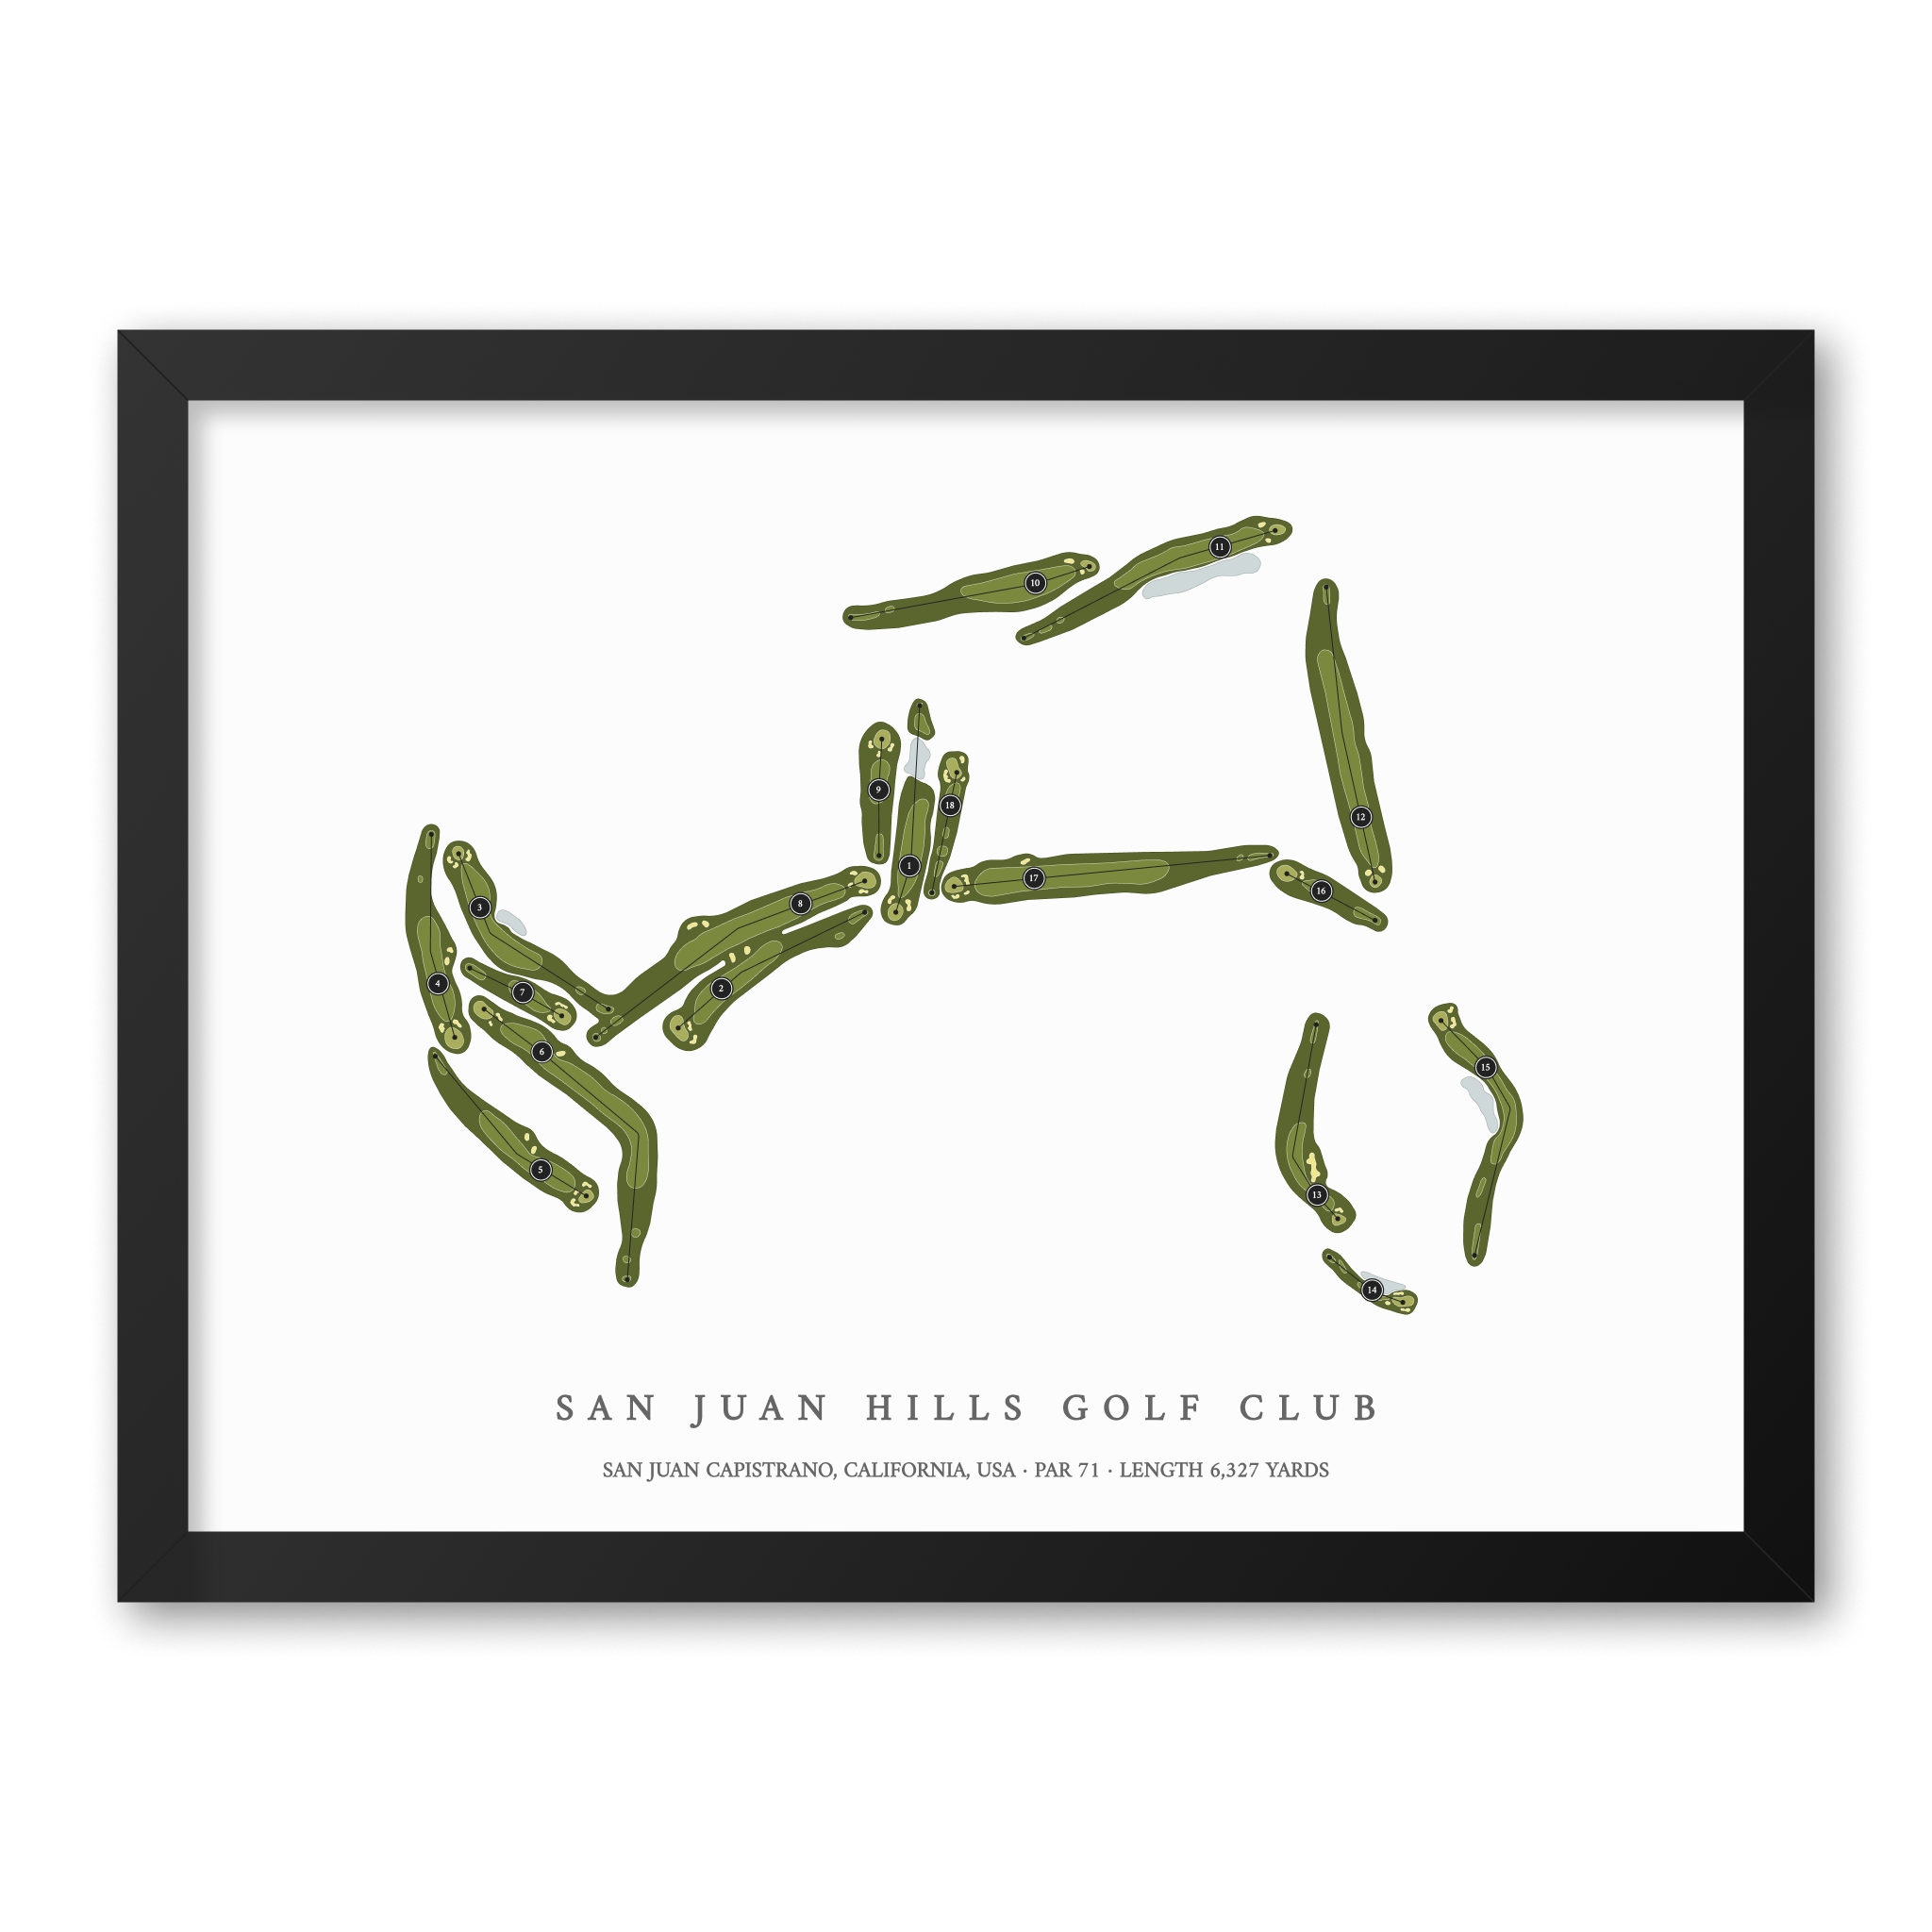 San Juan Hills Golf Club | Heritage Style Golf Course Print | Black Frame With Hole Numbers #hole numbers_yes